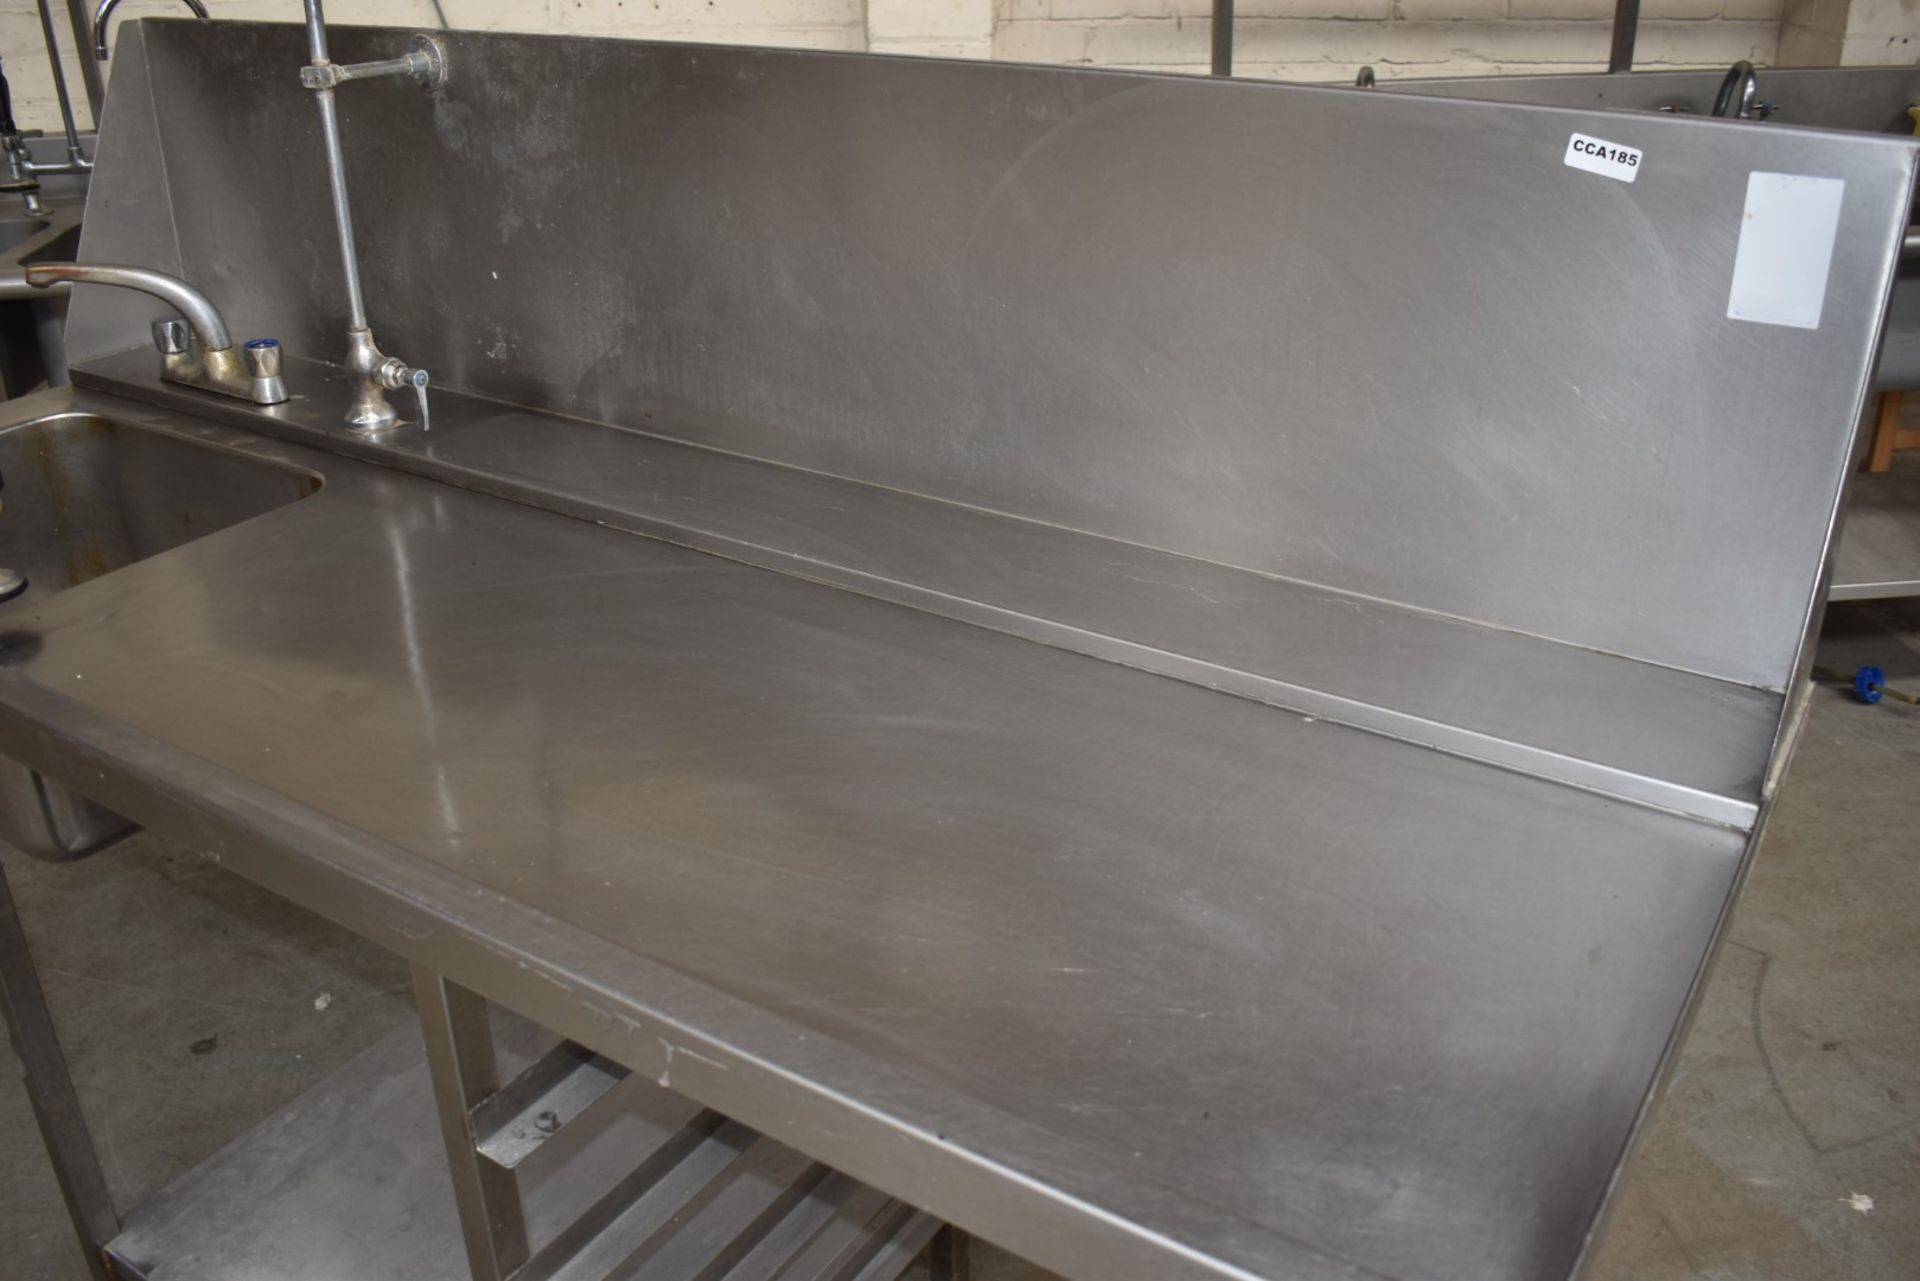 1 x Stainless Steel Passthrough Dishwasher Inlet Table Featuring Wash Basin, Mixer Tap, Hose Spray - Image 2 of 6